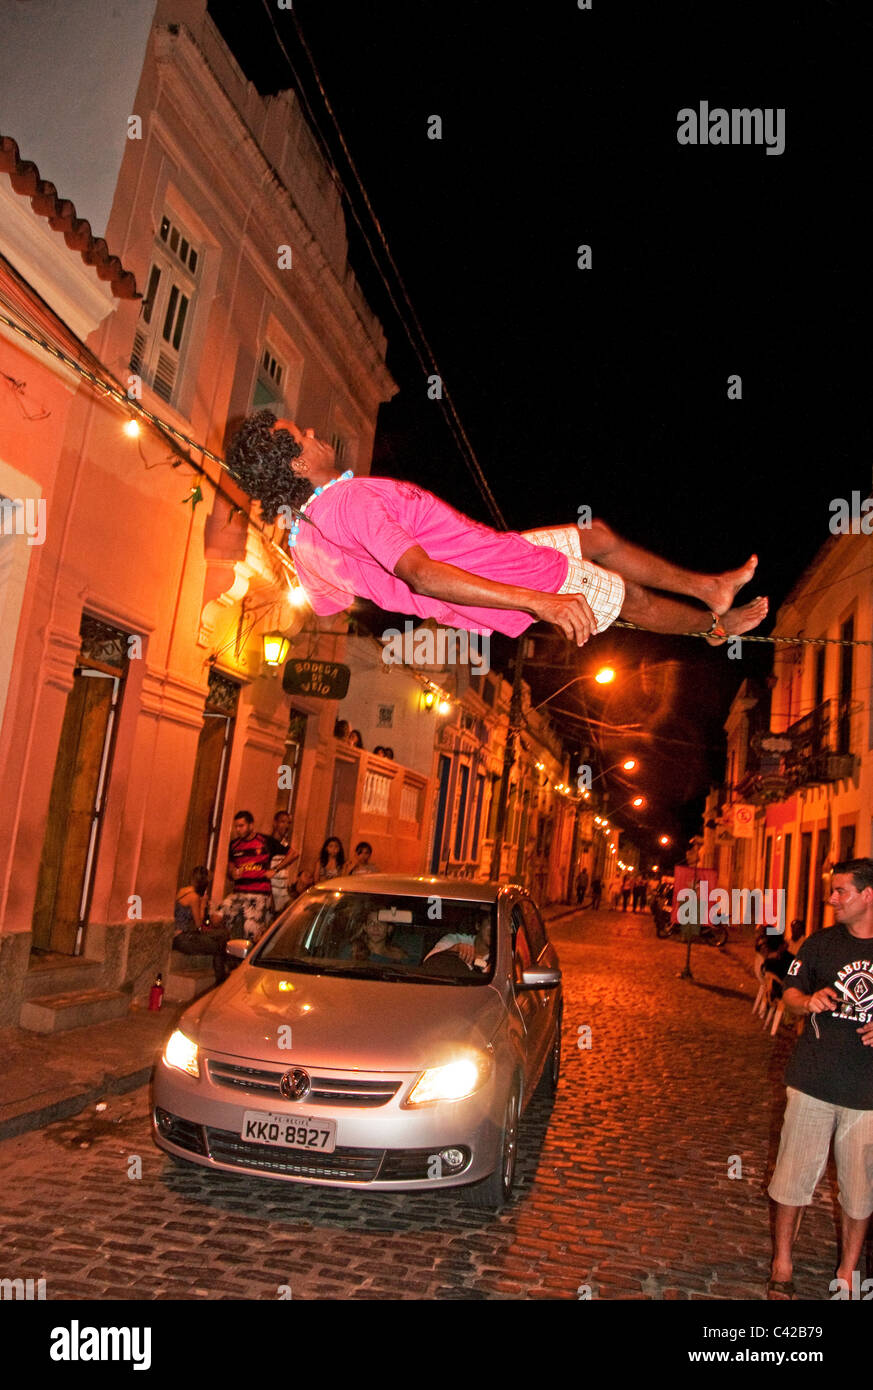 Tight rope entertainer performing in evening Olinda Brazil Stock Photo